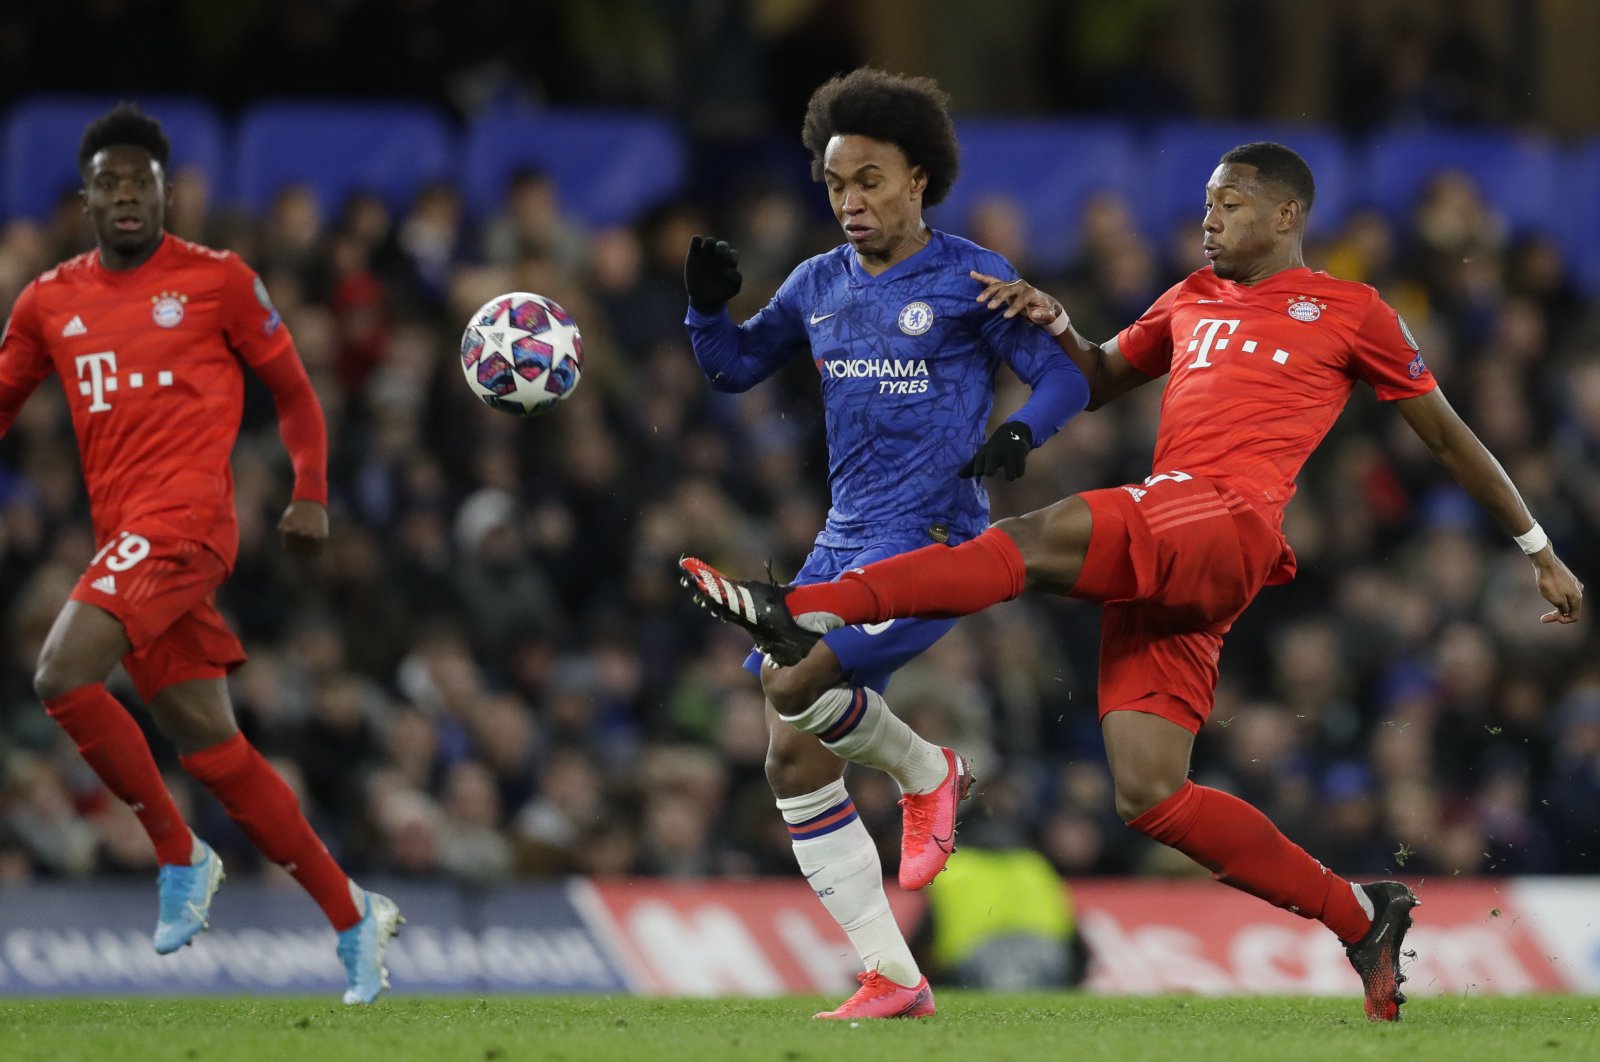 Bayern Munich's David Alaba challenges Chelsea's Willian during a Champions League match in London, England, Feb. 25, 2020. (AP Photo)